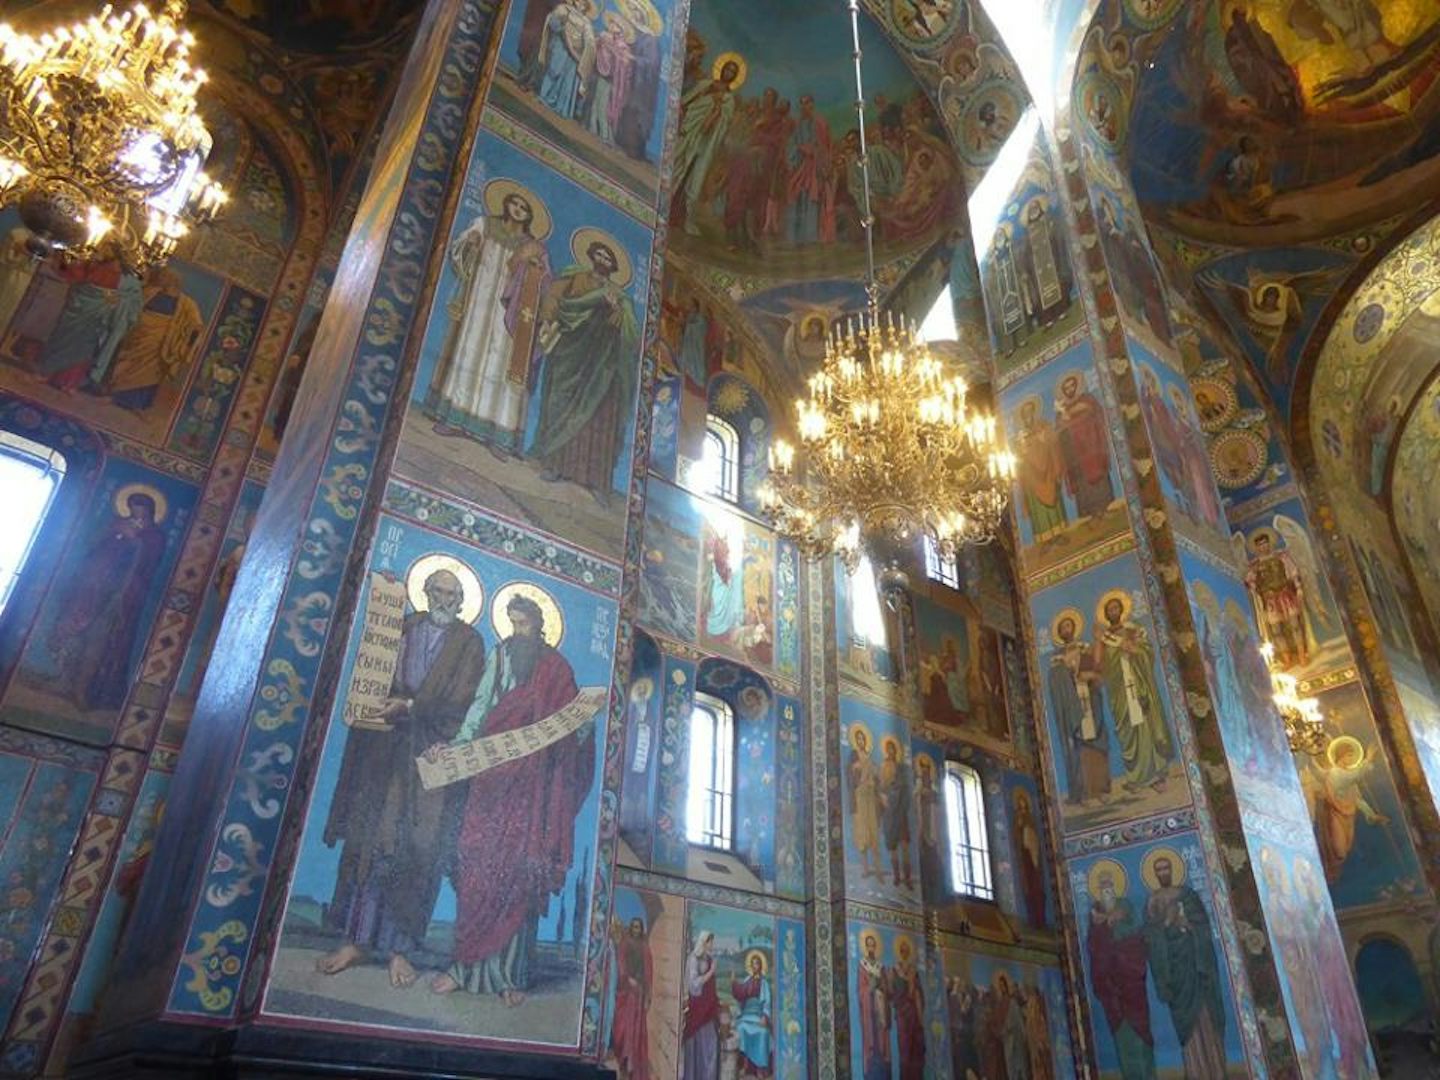 Interior of Church of Our Savior of Spilled Blood.  The interior walls are